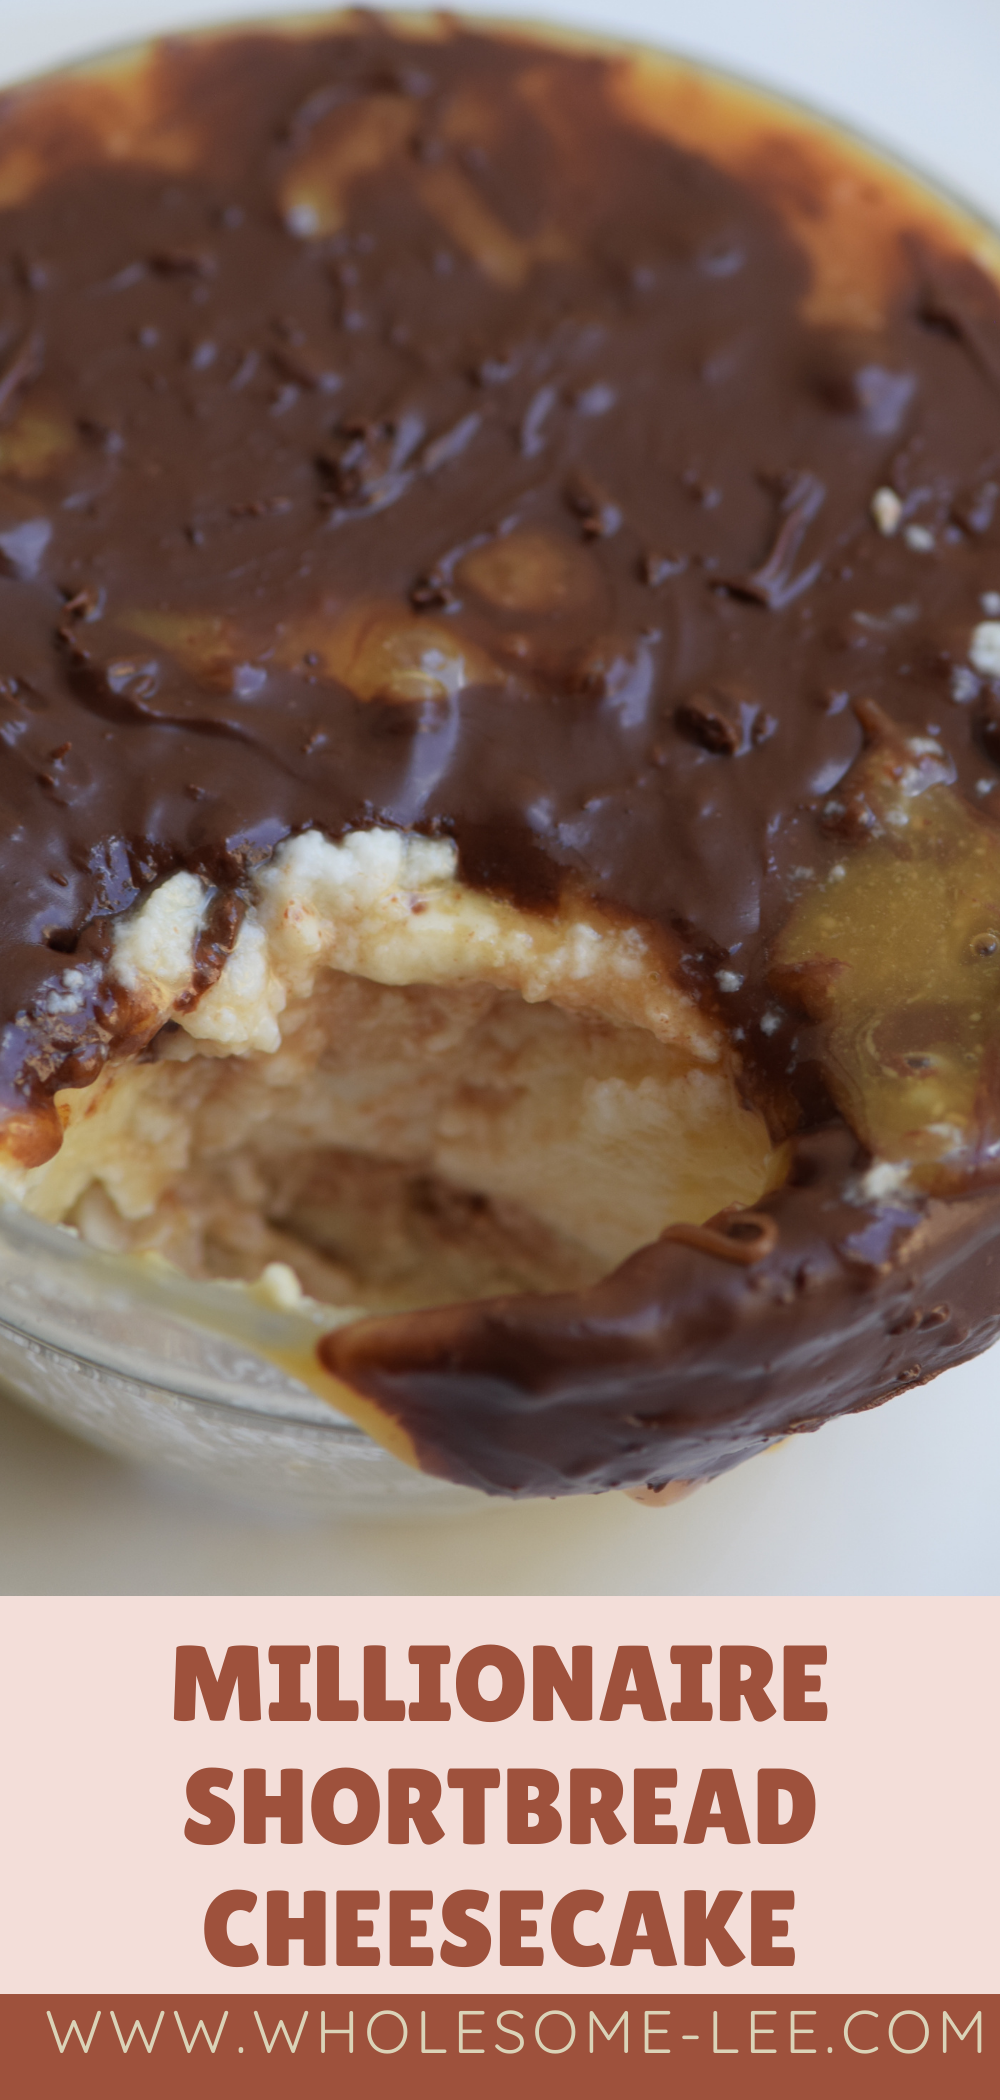 High protein peanut butter cup breakfast cheesecake